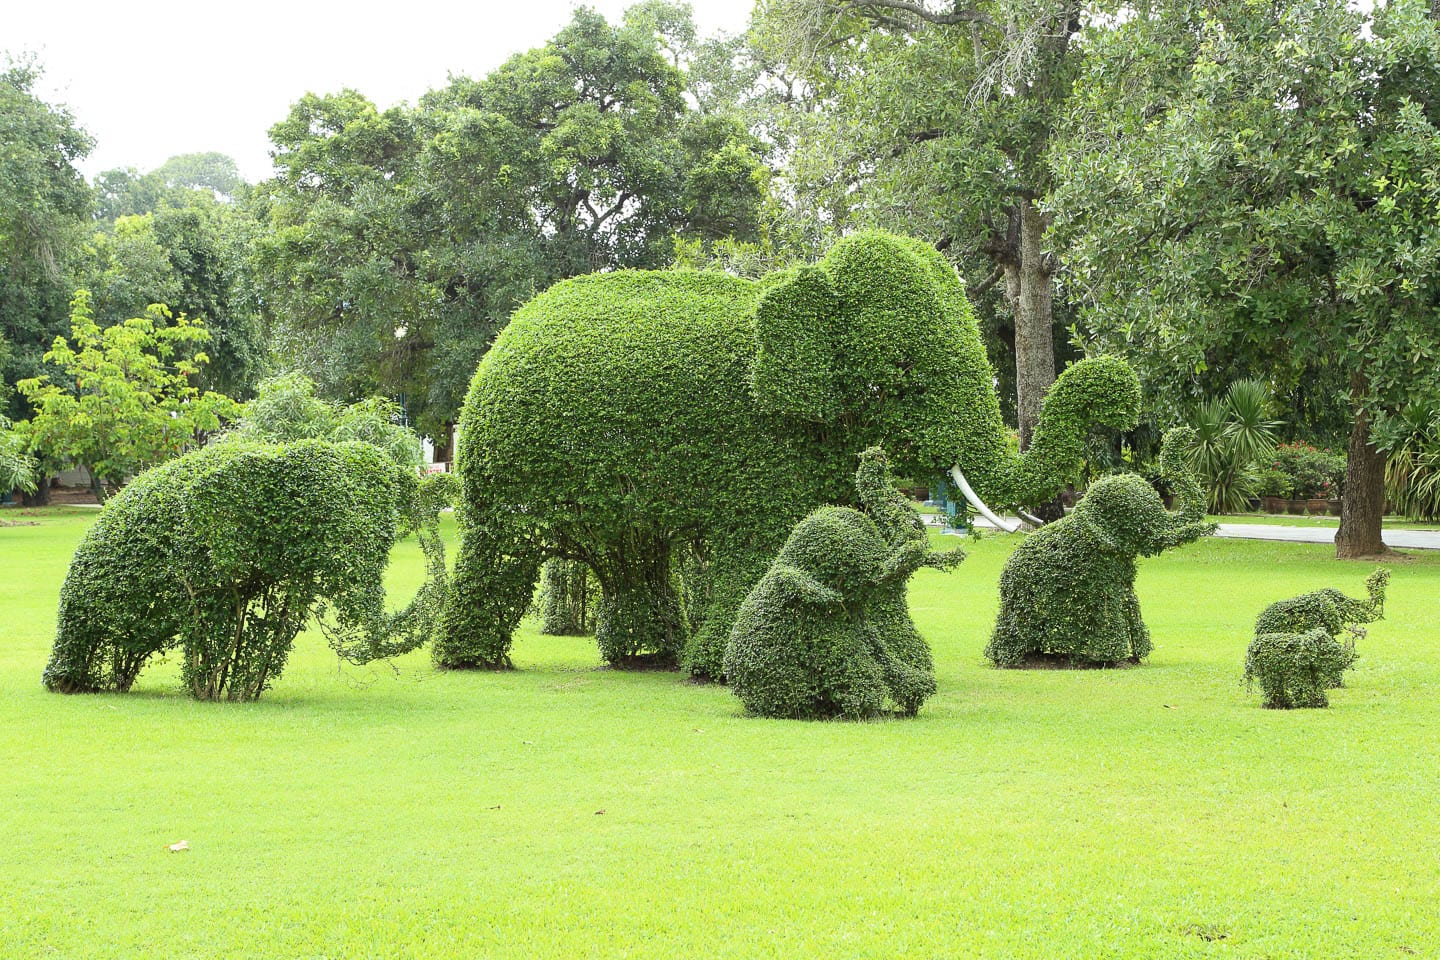 Topiary elephant family in a park